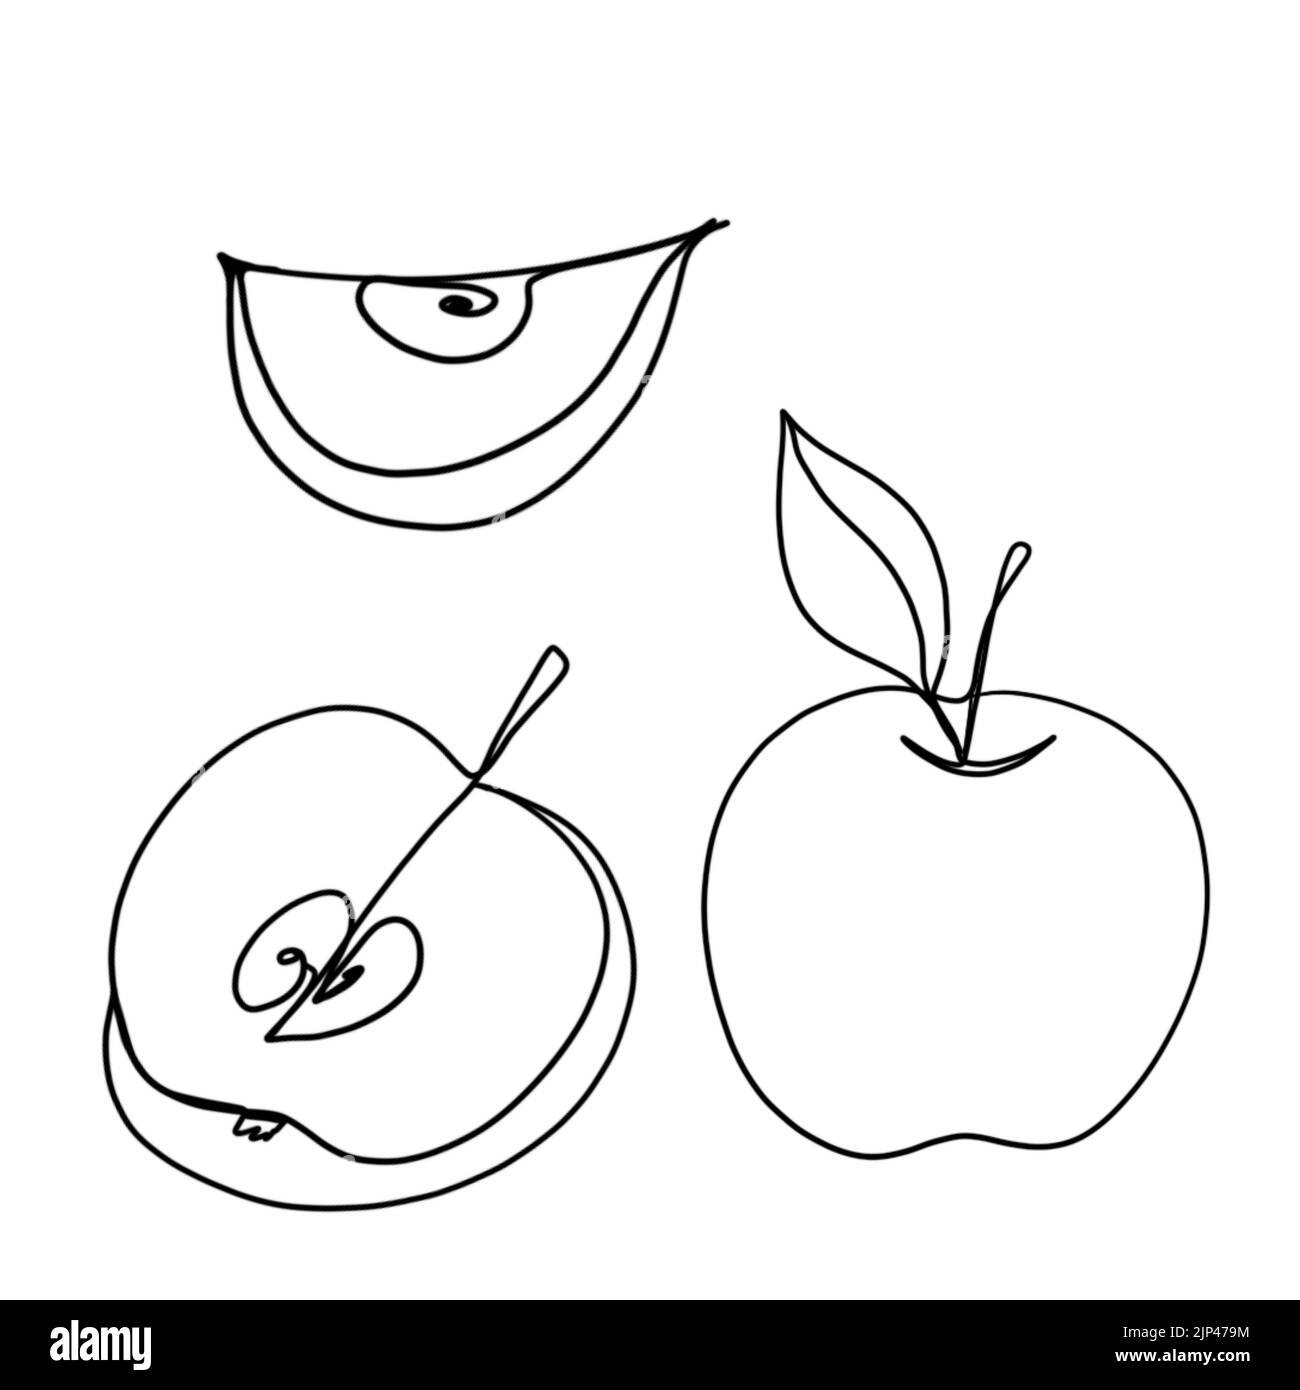 Apple continuous line drawing, Black and white minimalistic linear illustration made of one line. whole apple and half apple Stock Photo